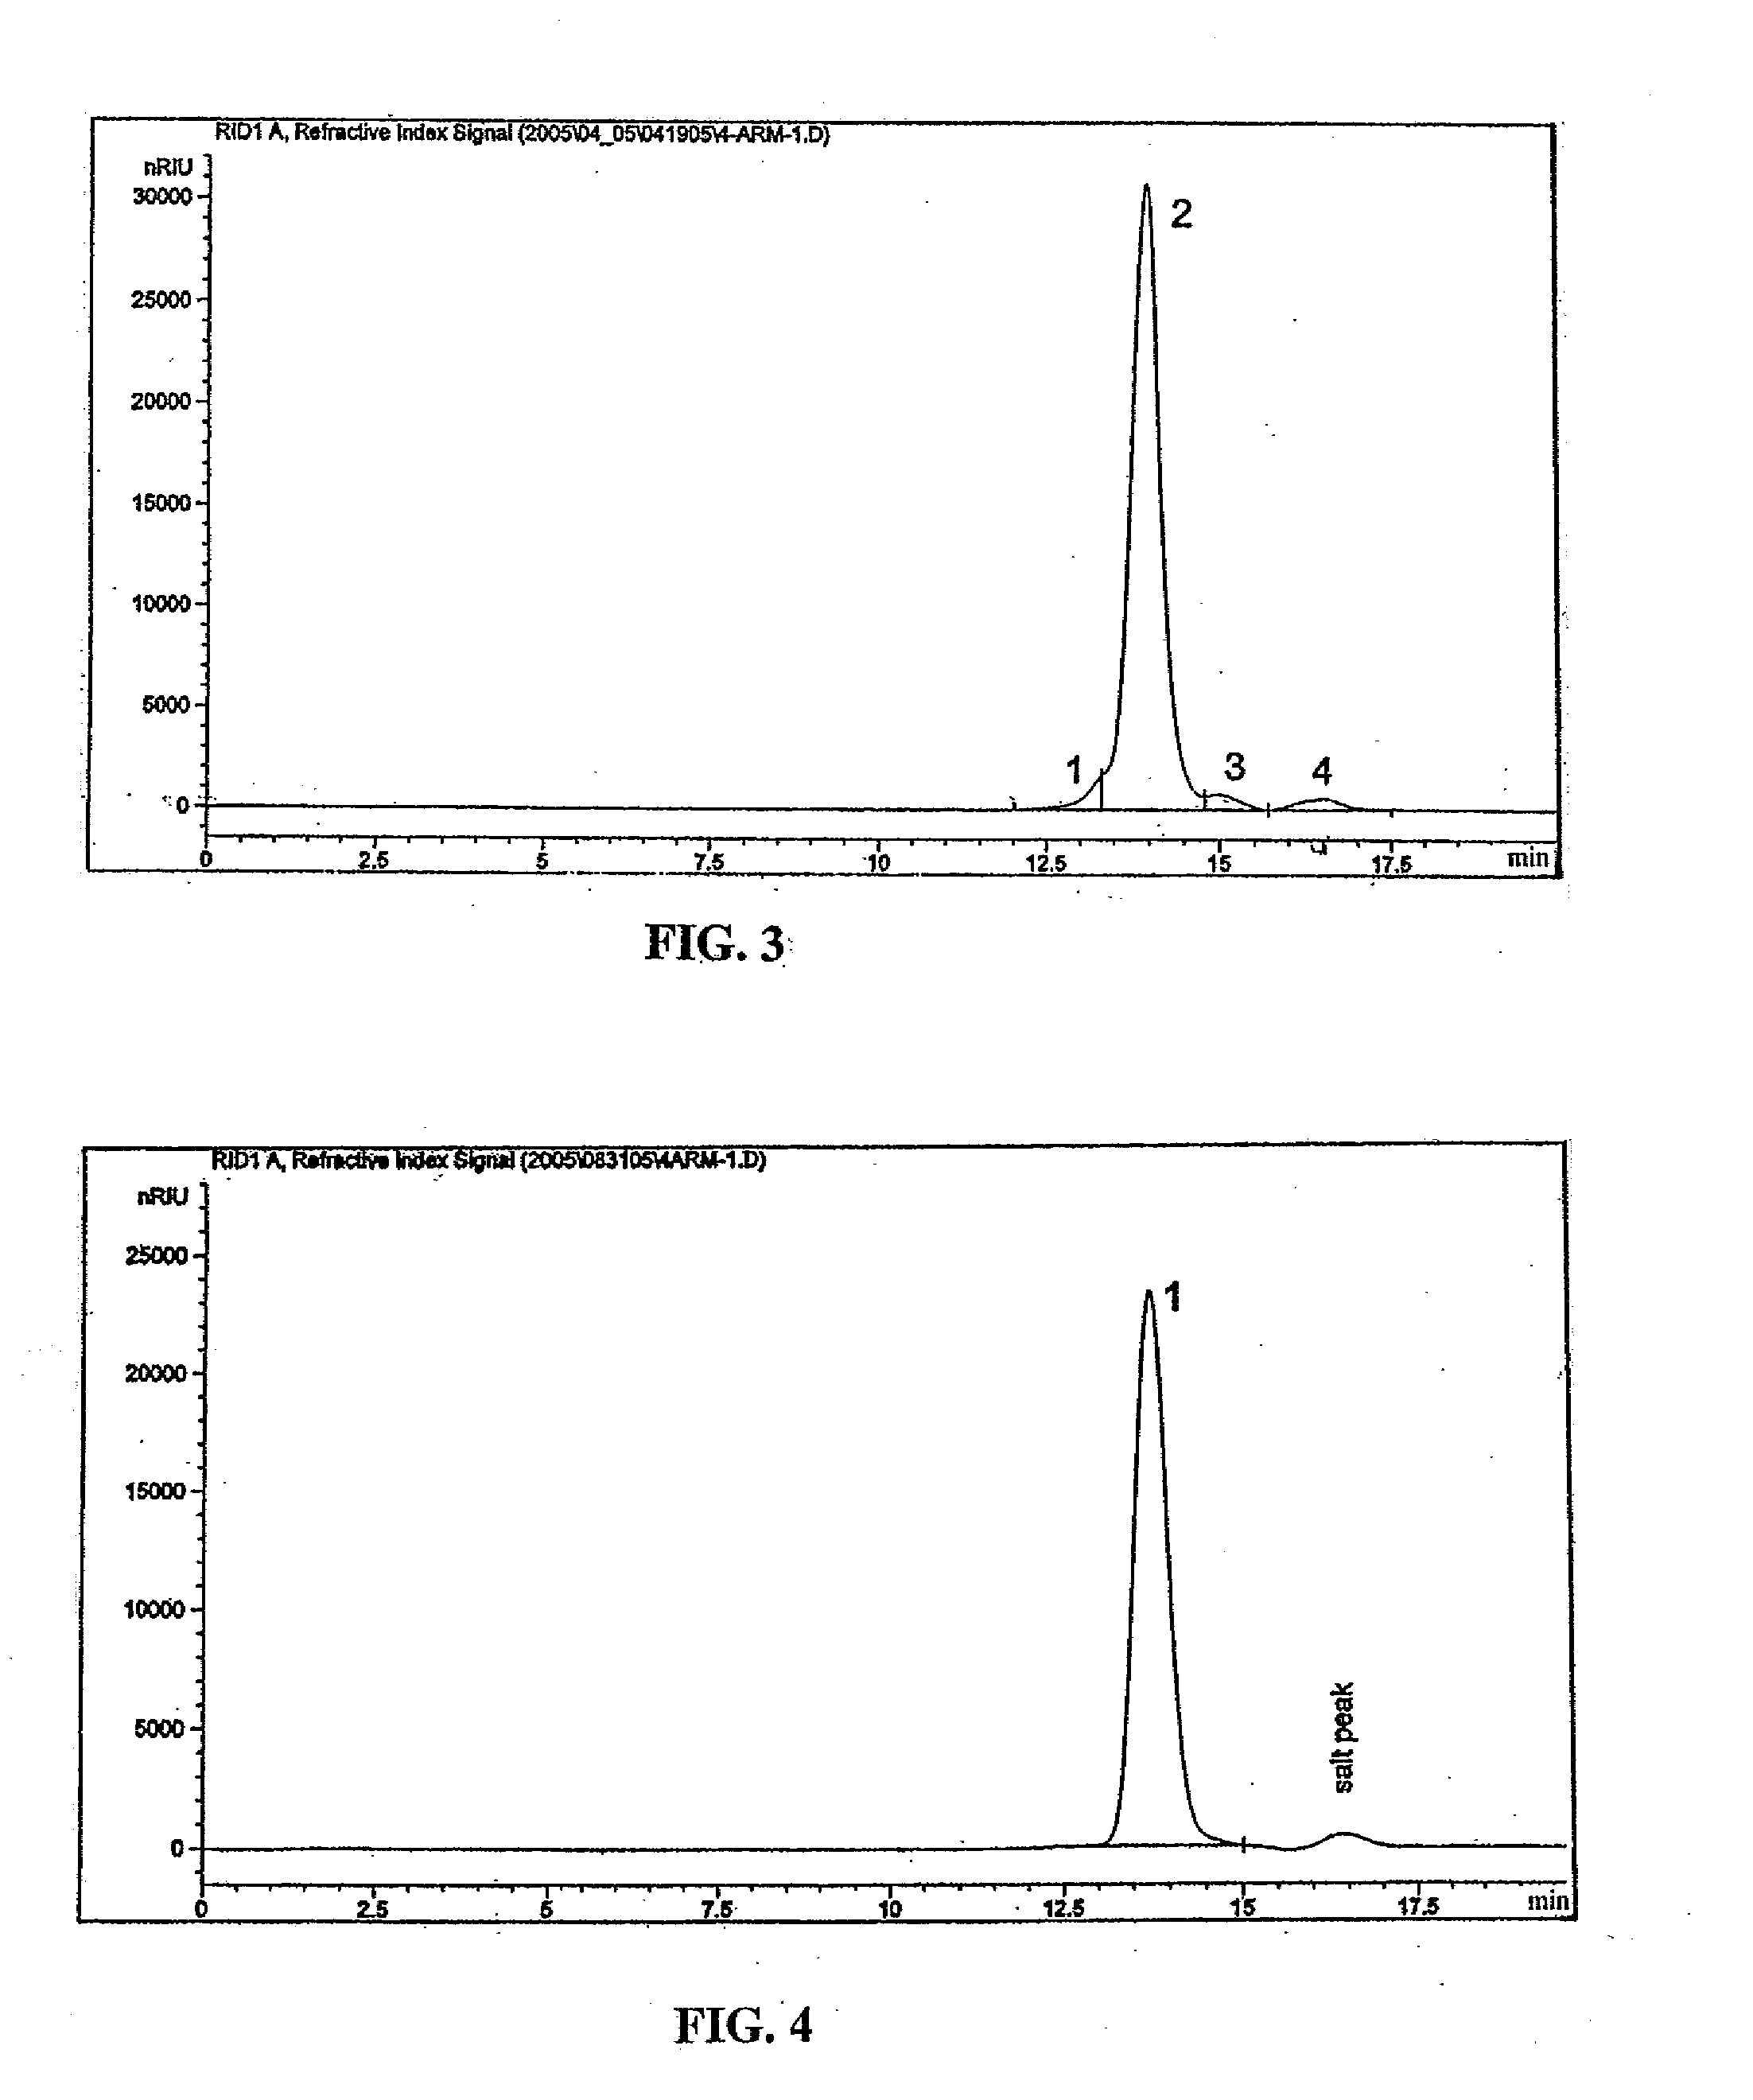 Method for Preparing Branched Functionalized Polymers Using Branched Polyol Cores